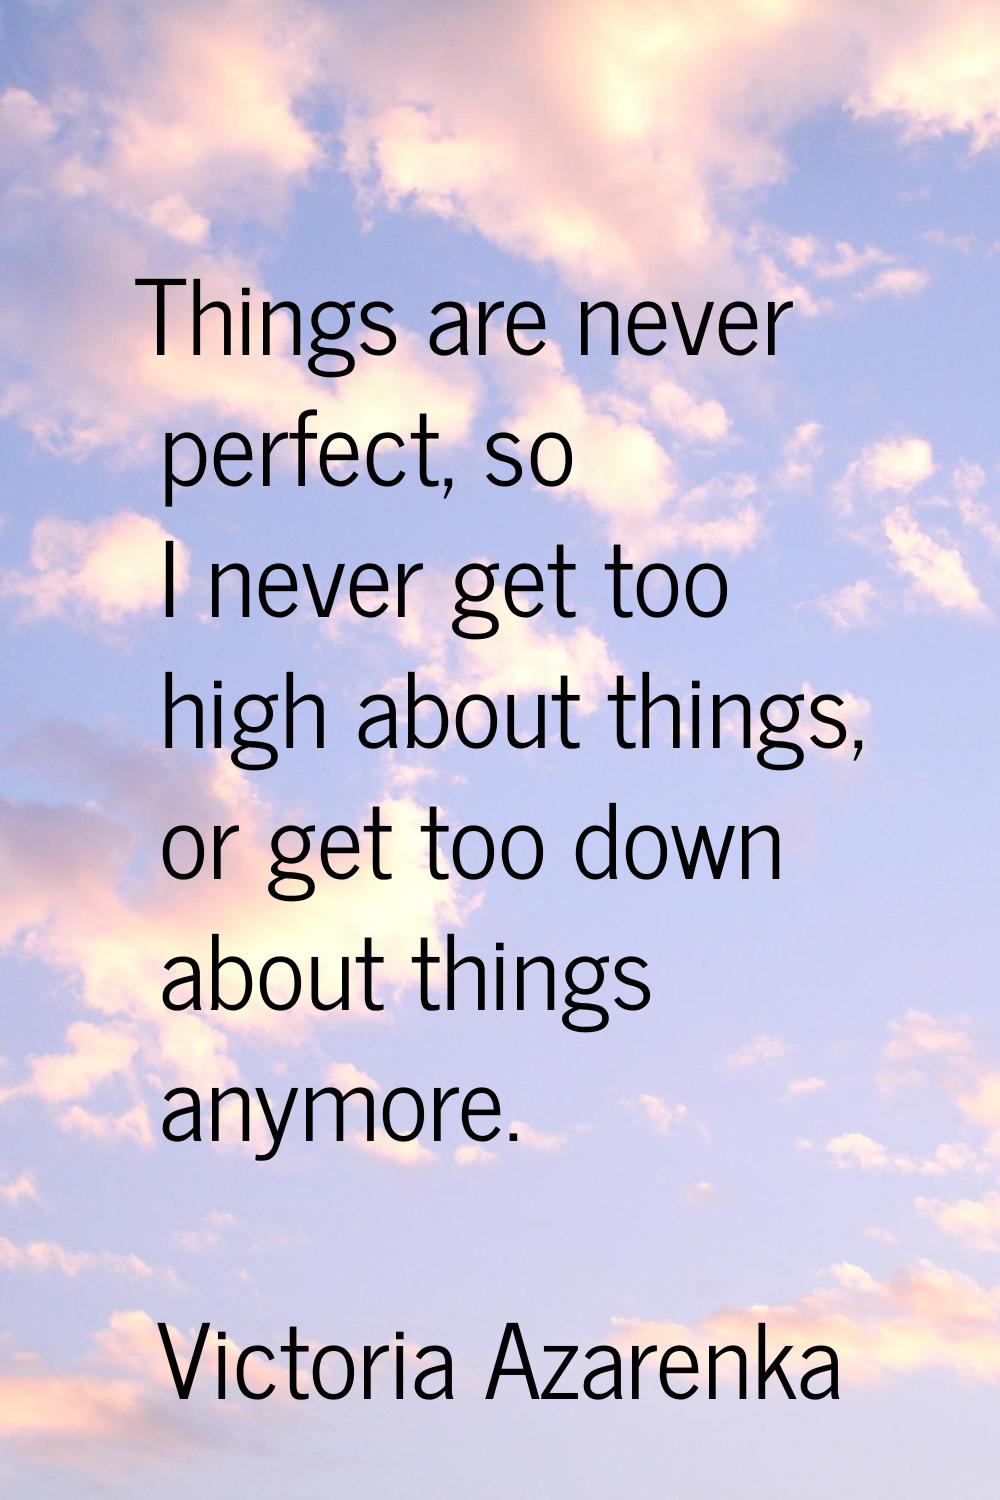 Things are never perfect, so I never get too high about things, or get too down about things anymor